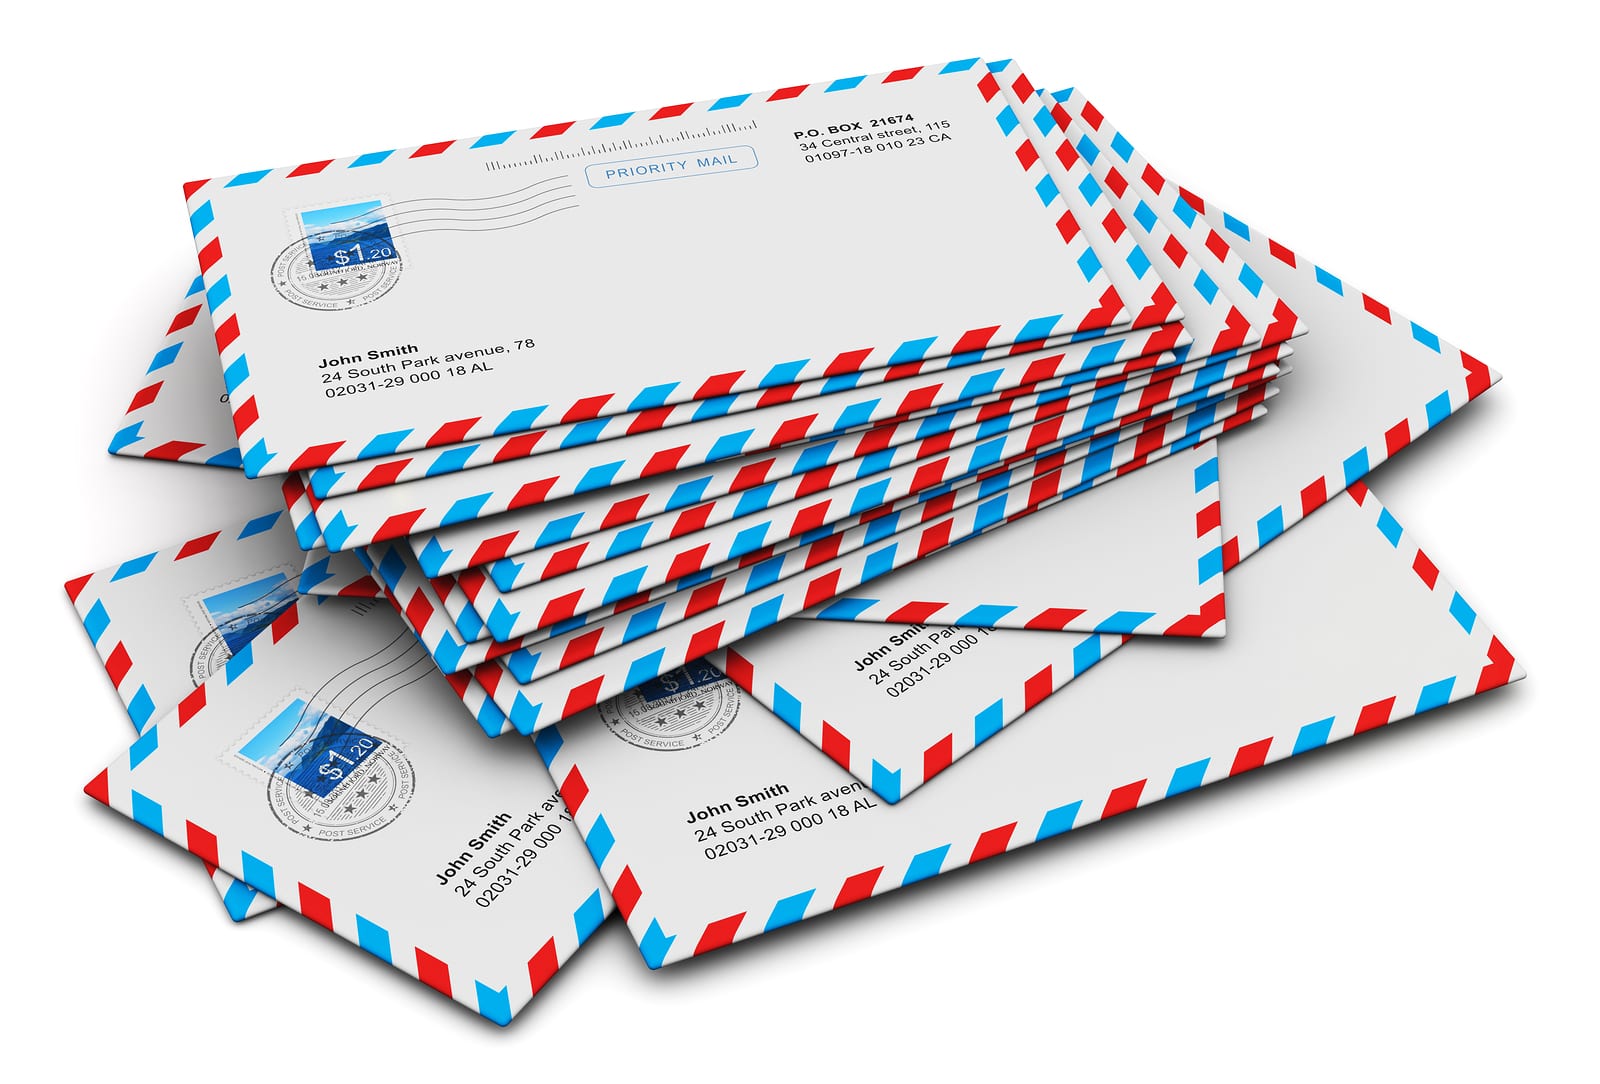 bigstock-Stack-of-paper-mail-letters-85424135